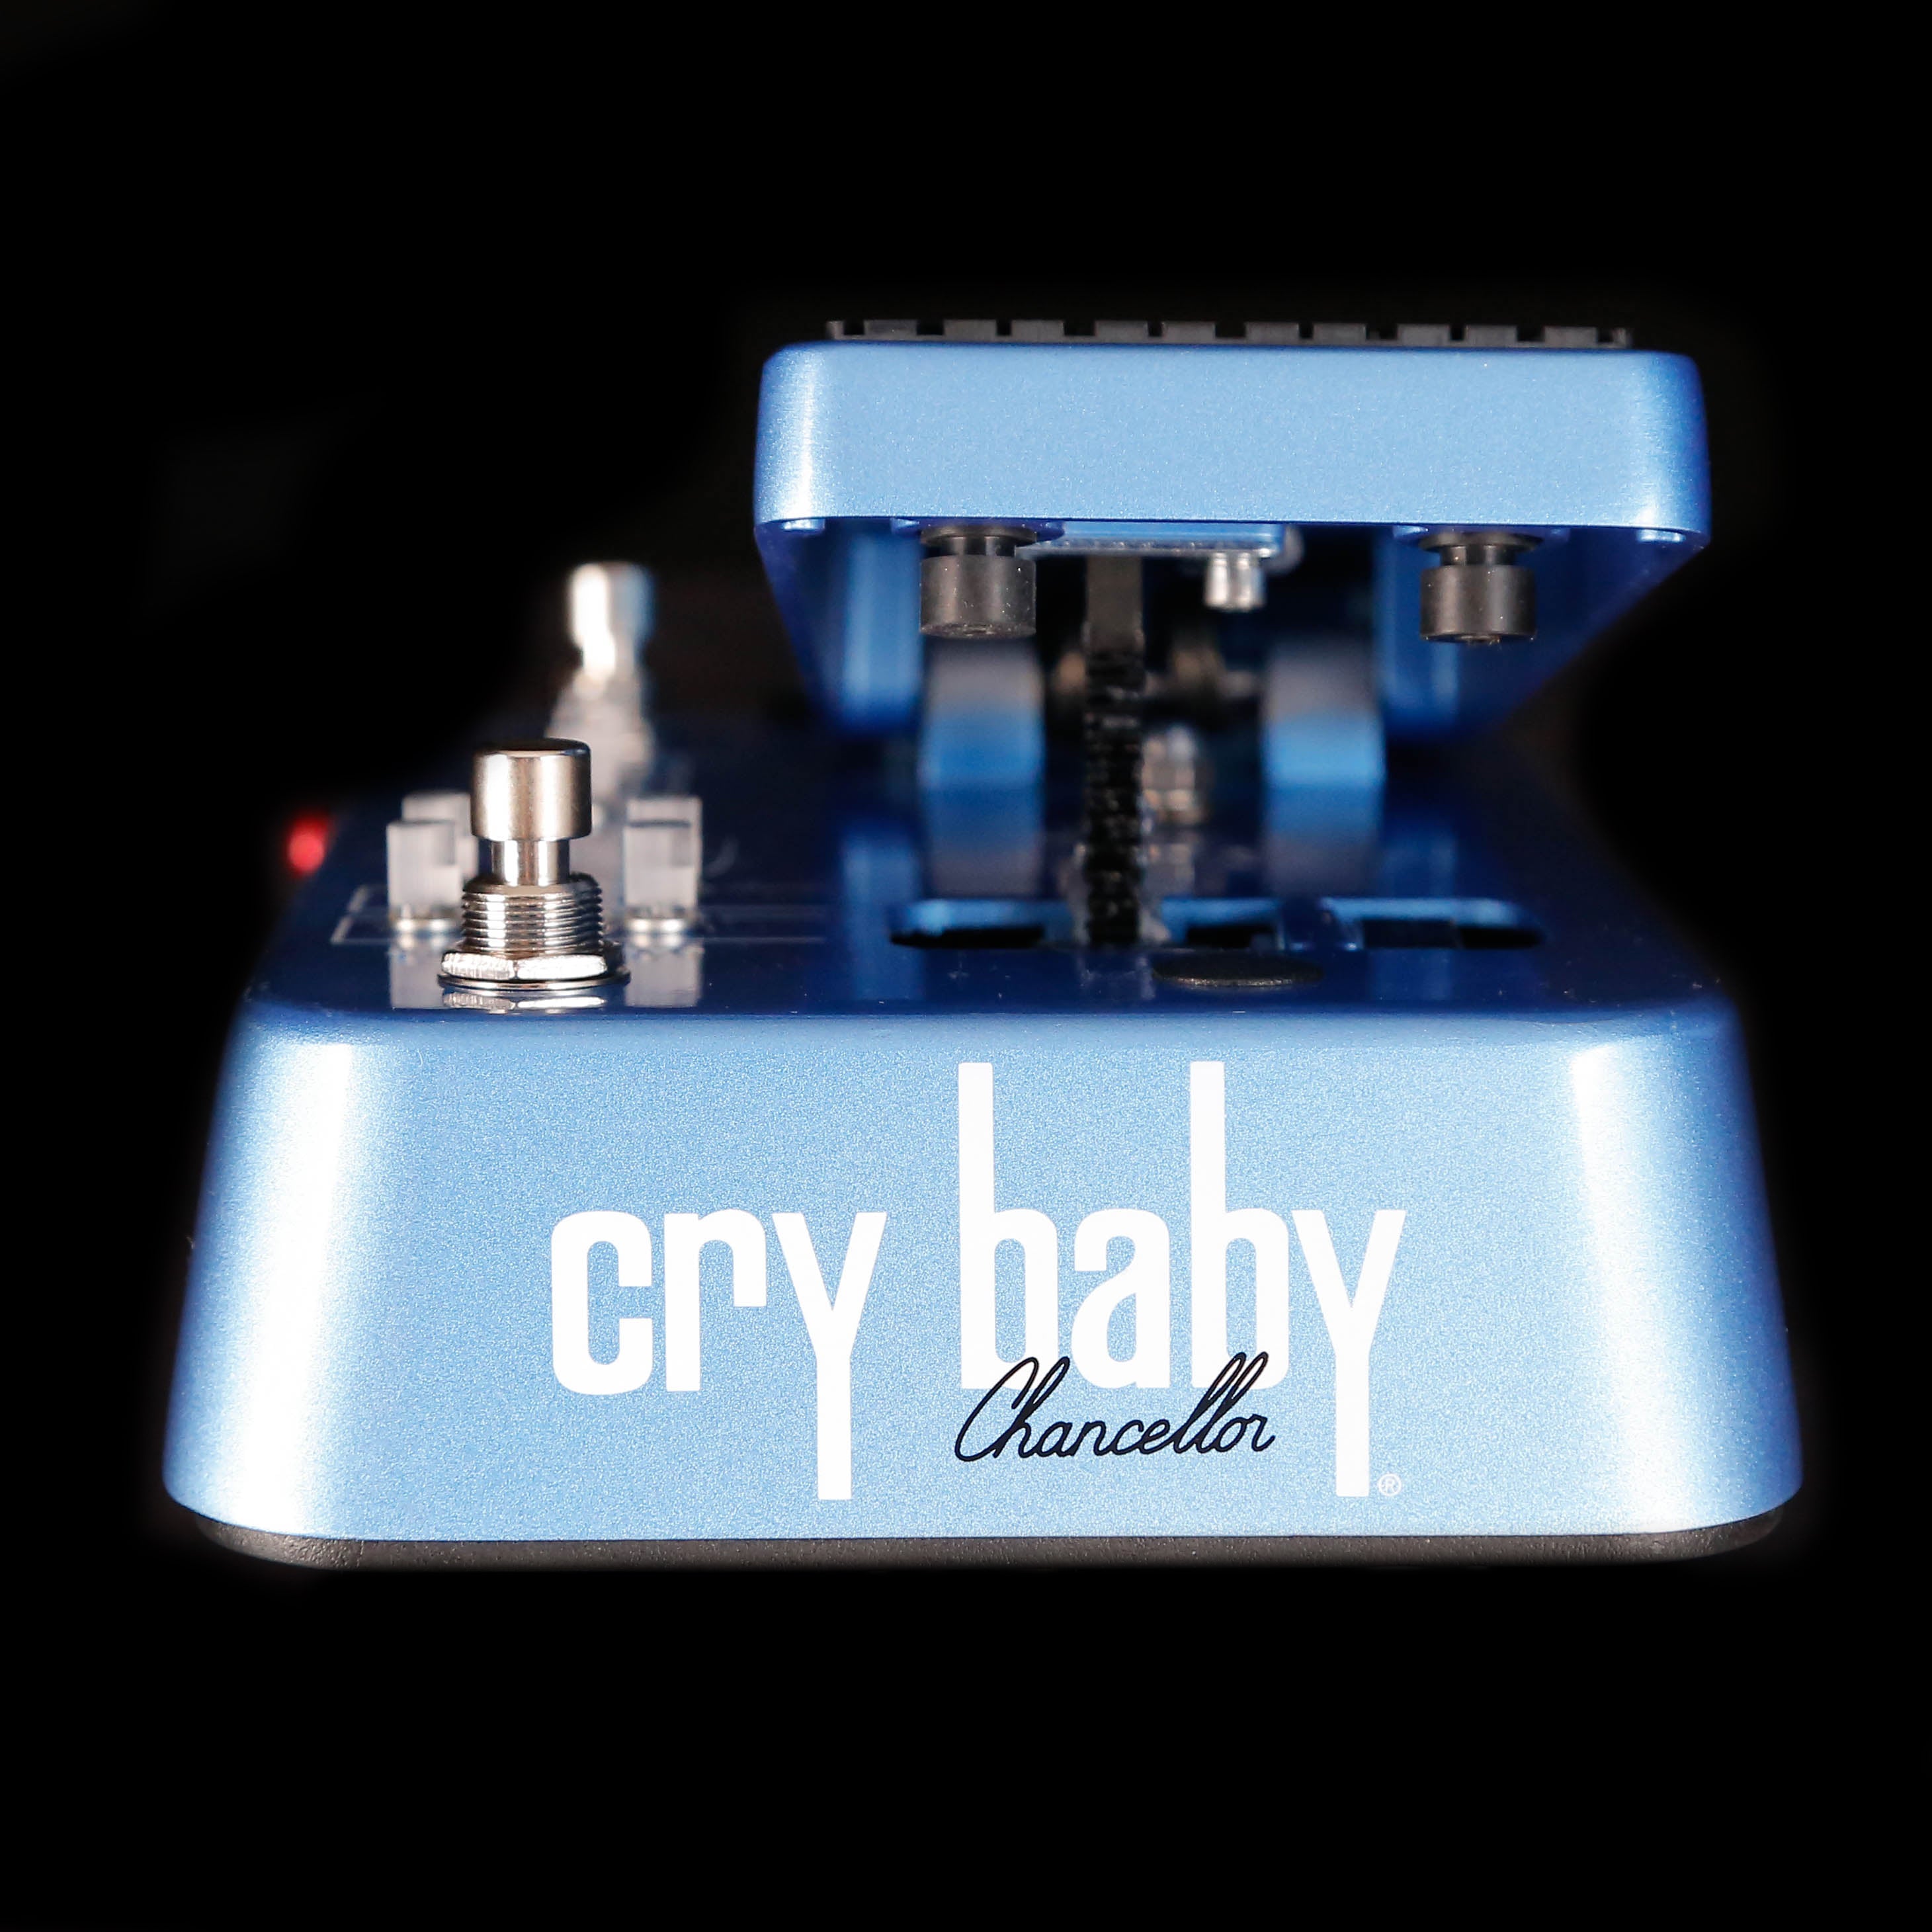 Dunlop JCT95 Justin Chancellor Cry Baby Wah Pedal